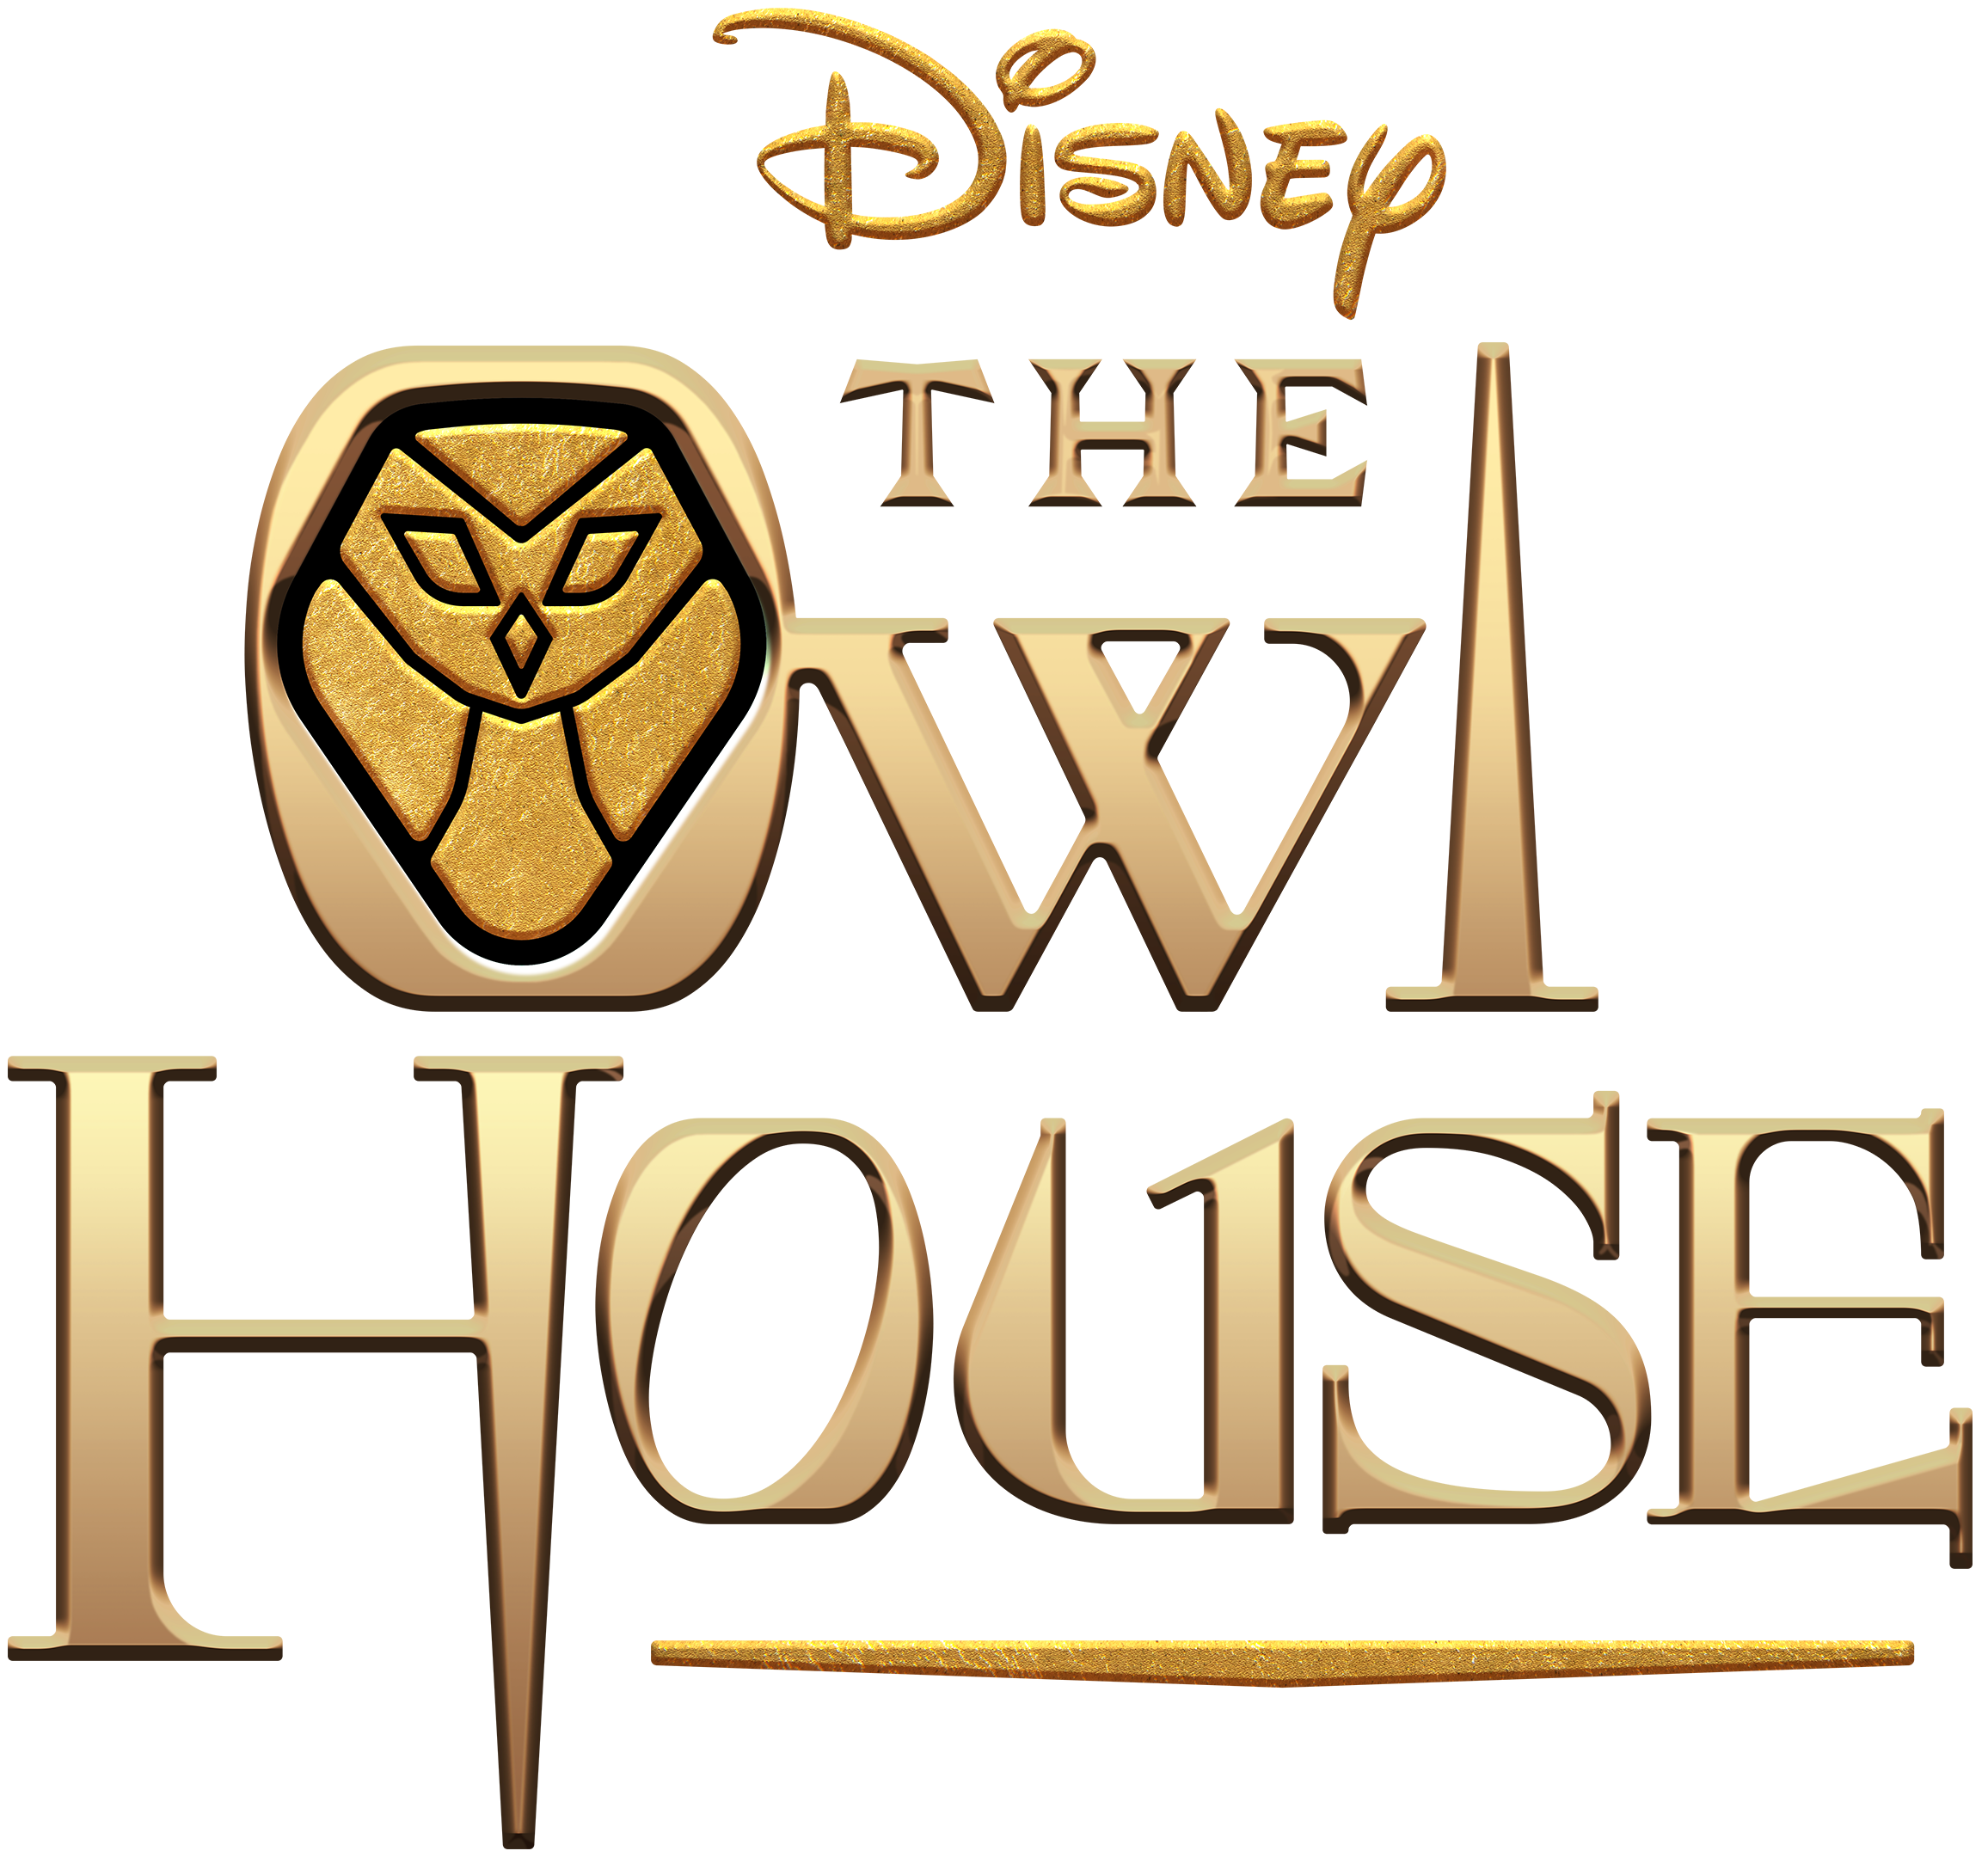 Ally Maki & Noah Galvin To Guest Star on 'The Owl House' – Watch an  Exclusive Sneak Peek!, Ally Maki, Disney Channel, Exclusive, Noah Galvin,  Television, The Owl House, Video